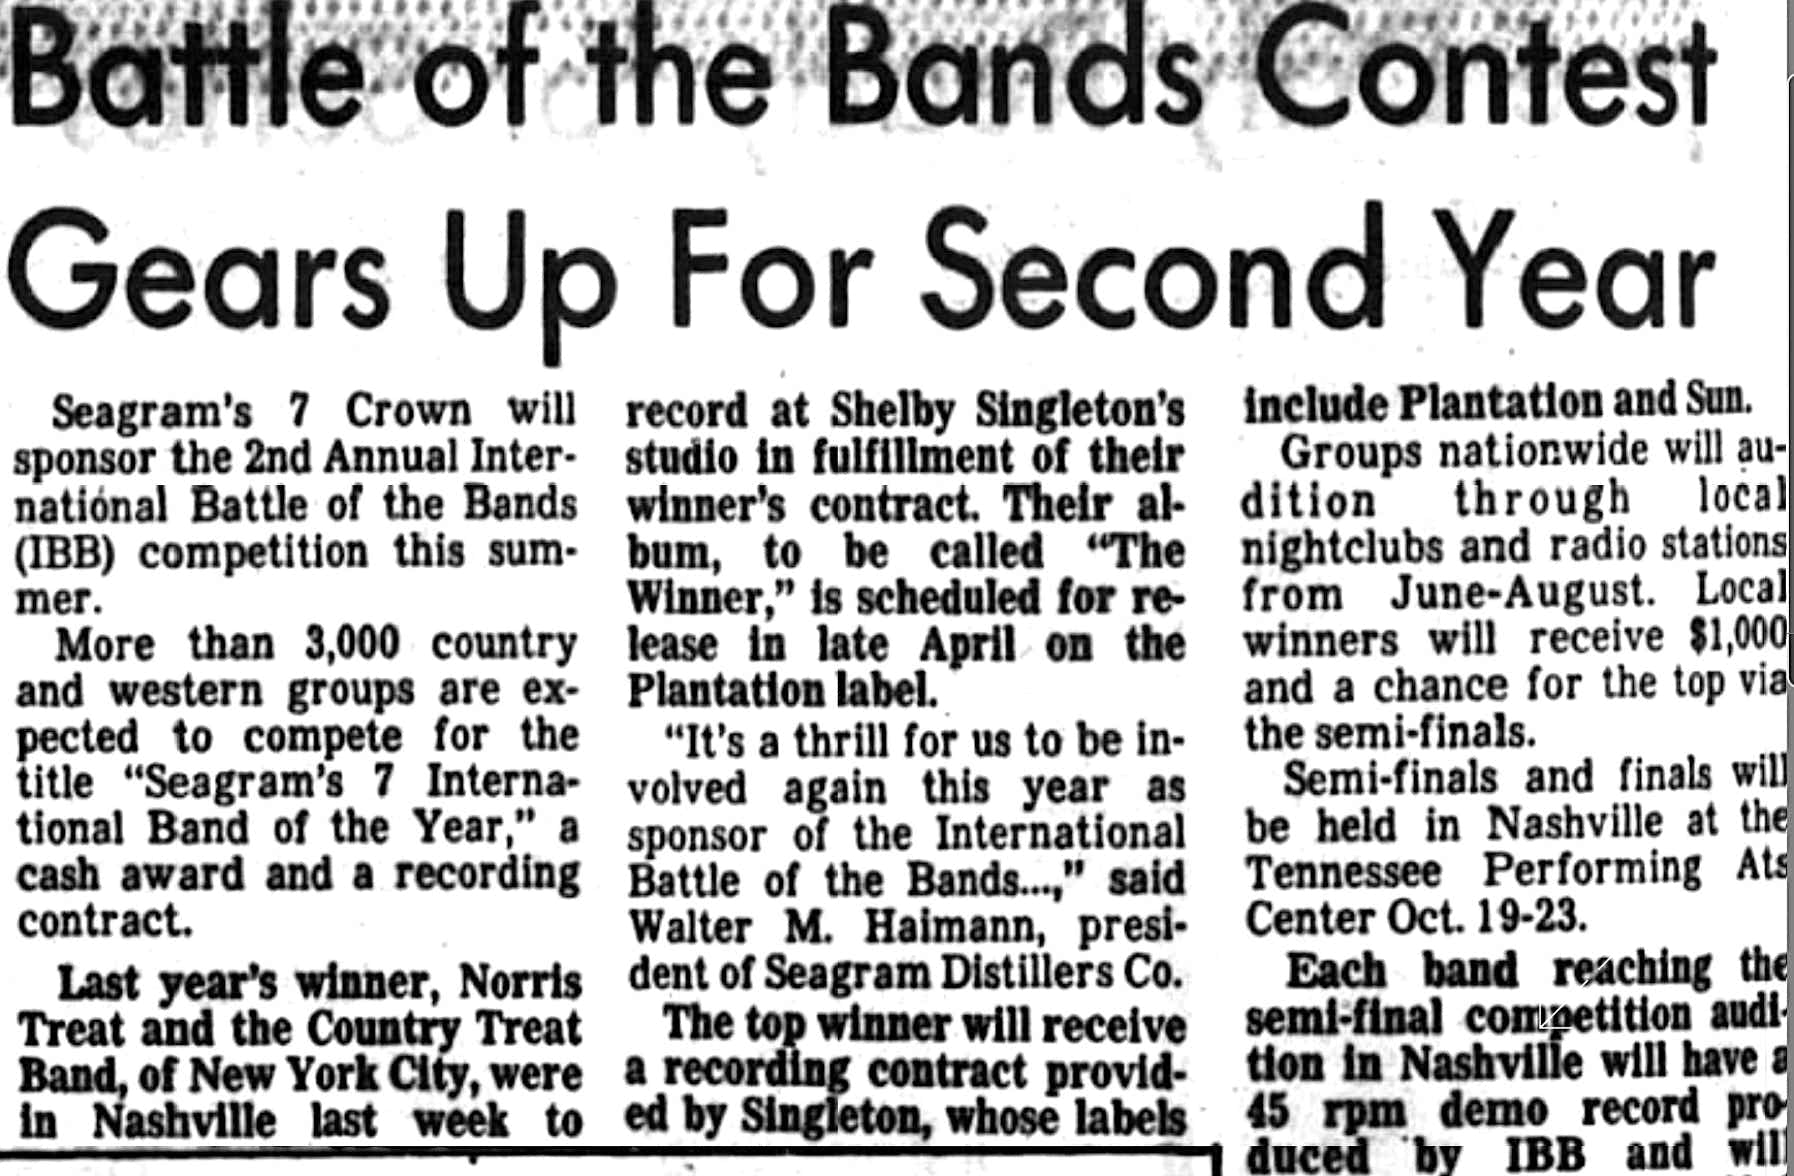 Newspaper article announcing the 1981 Seagram's 7 International Band of the Year competition. Baked Apple Band ends up winning 2nd place and hires Ryan Thomson as fiddler after gaining a contract from a Nashville agency.